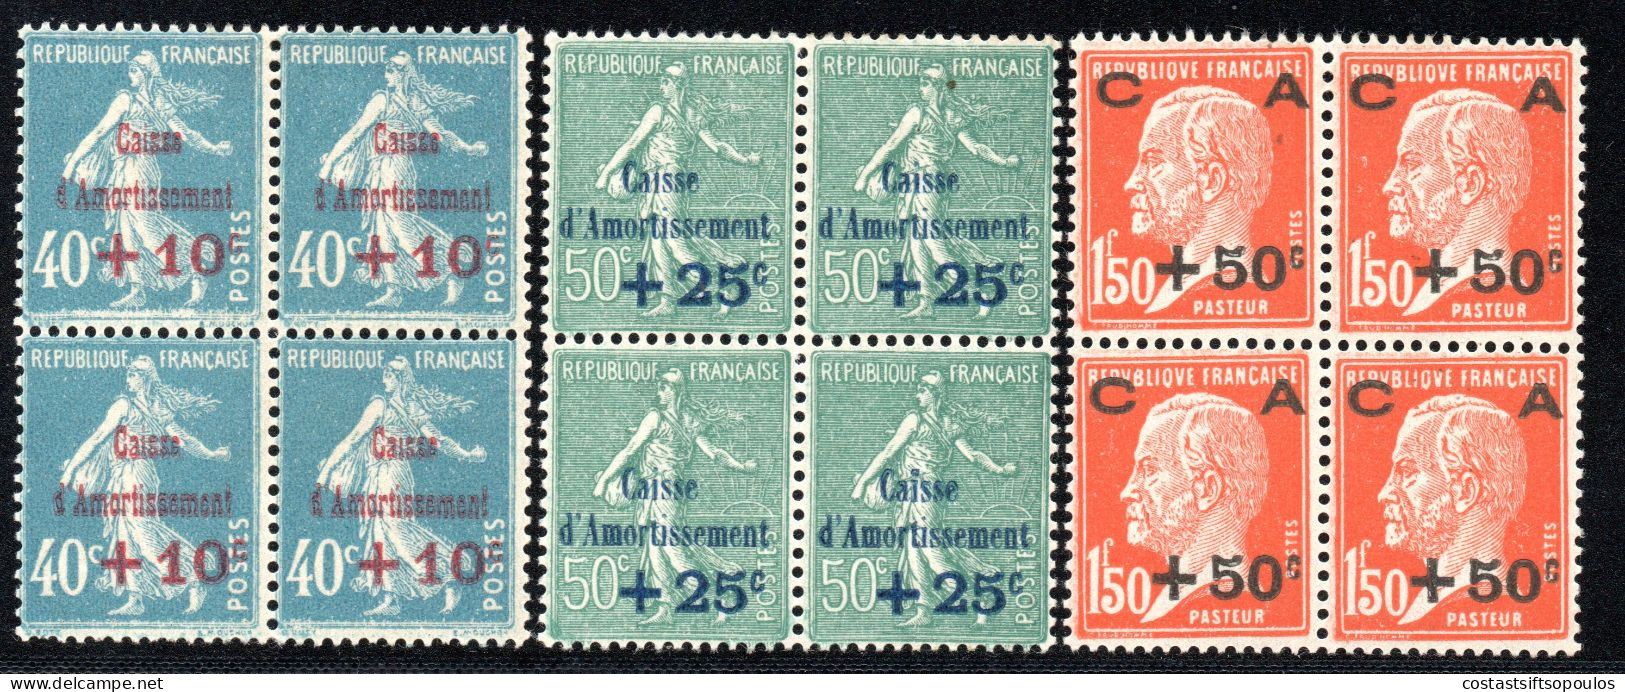 2685.FRANCE 1927 SINKING FUND Y.T.246-248,SC. B24-B26, BLOCKS OF 4, UPPER PAIR VERY LIGHT TRACES OF HINGE,LOWER MNH - 1927-31 Caisse D'Amortissement